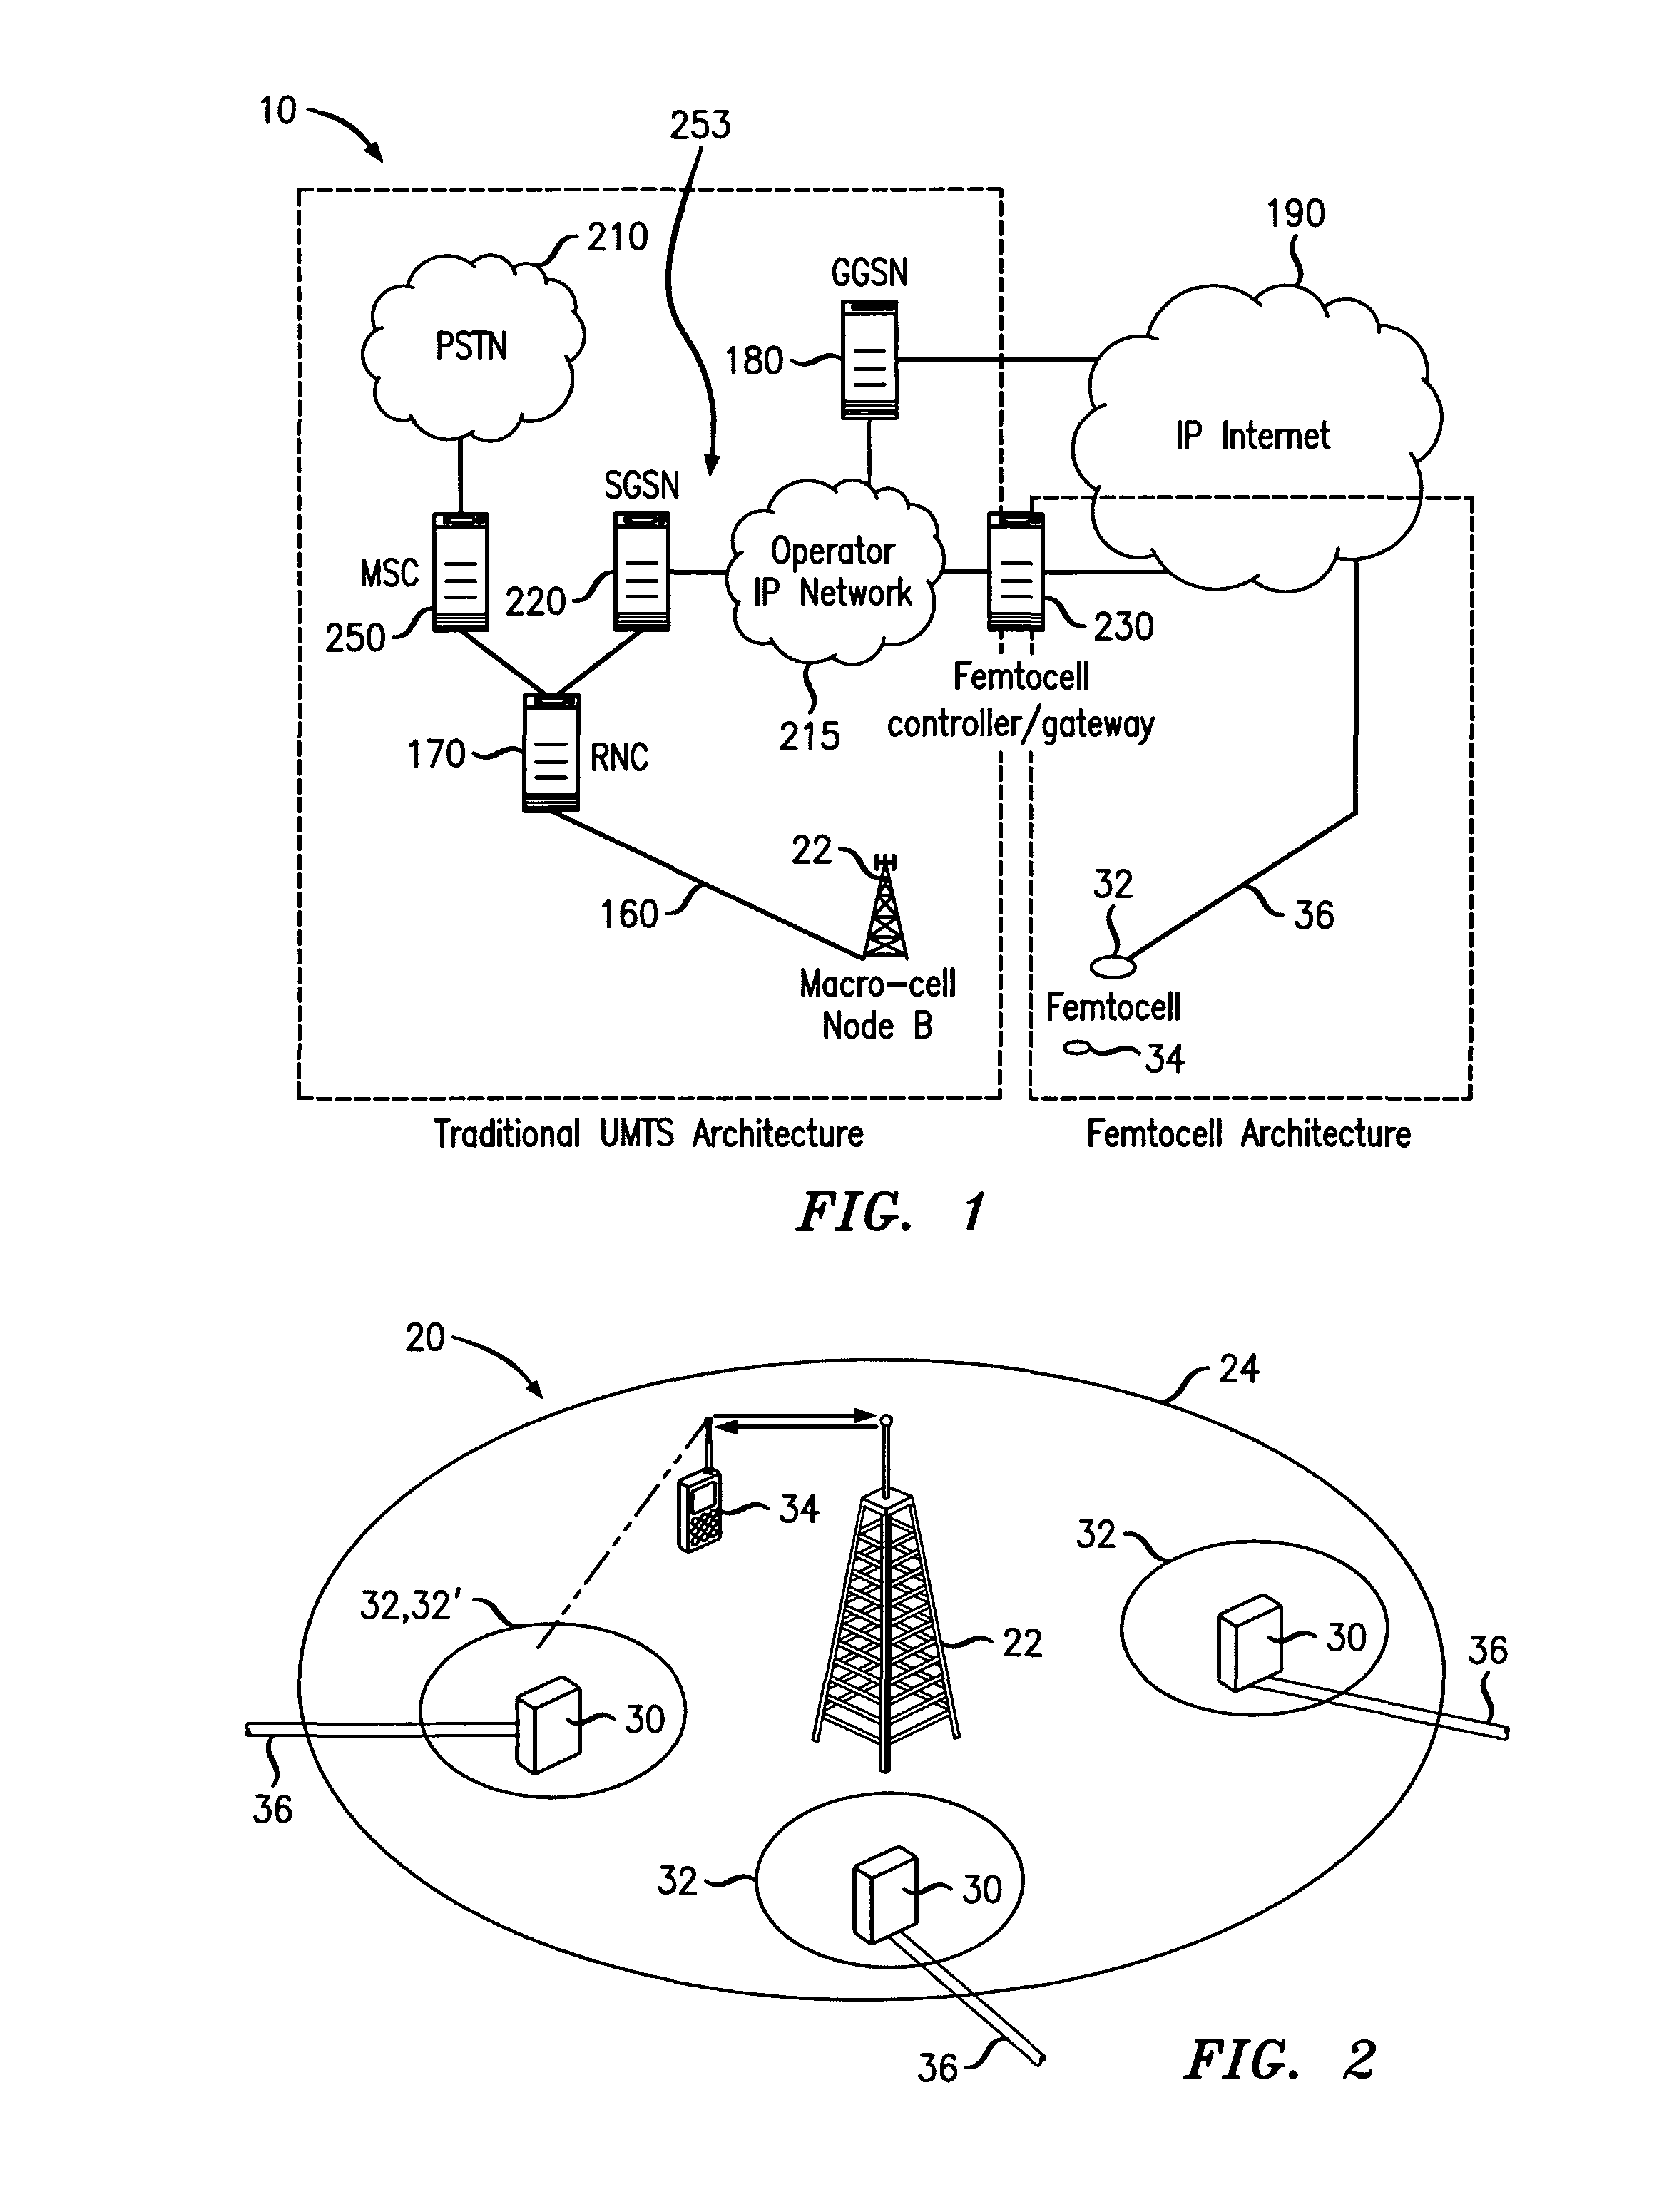 Small cell base station comprising multiple antennas, and a method of controlling reception pattern by selecting a subset of the antennas for use